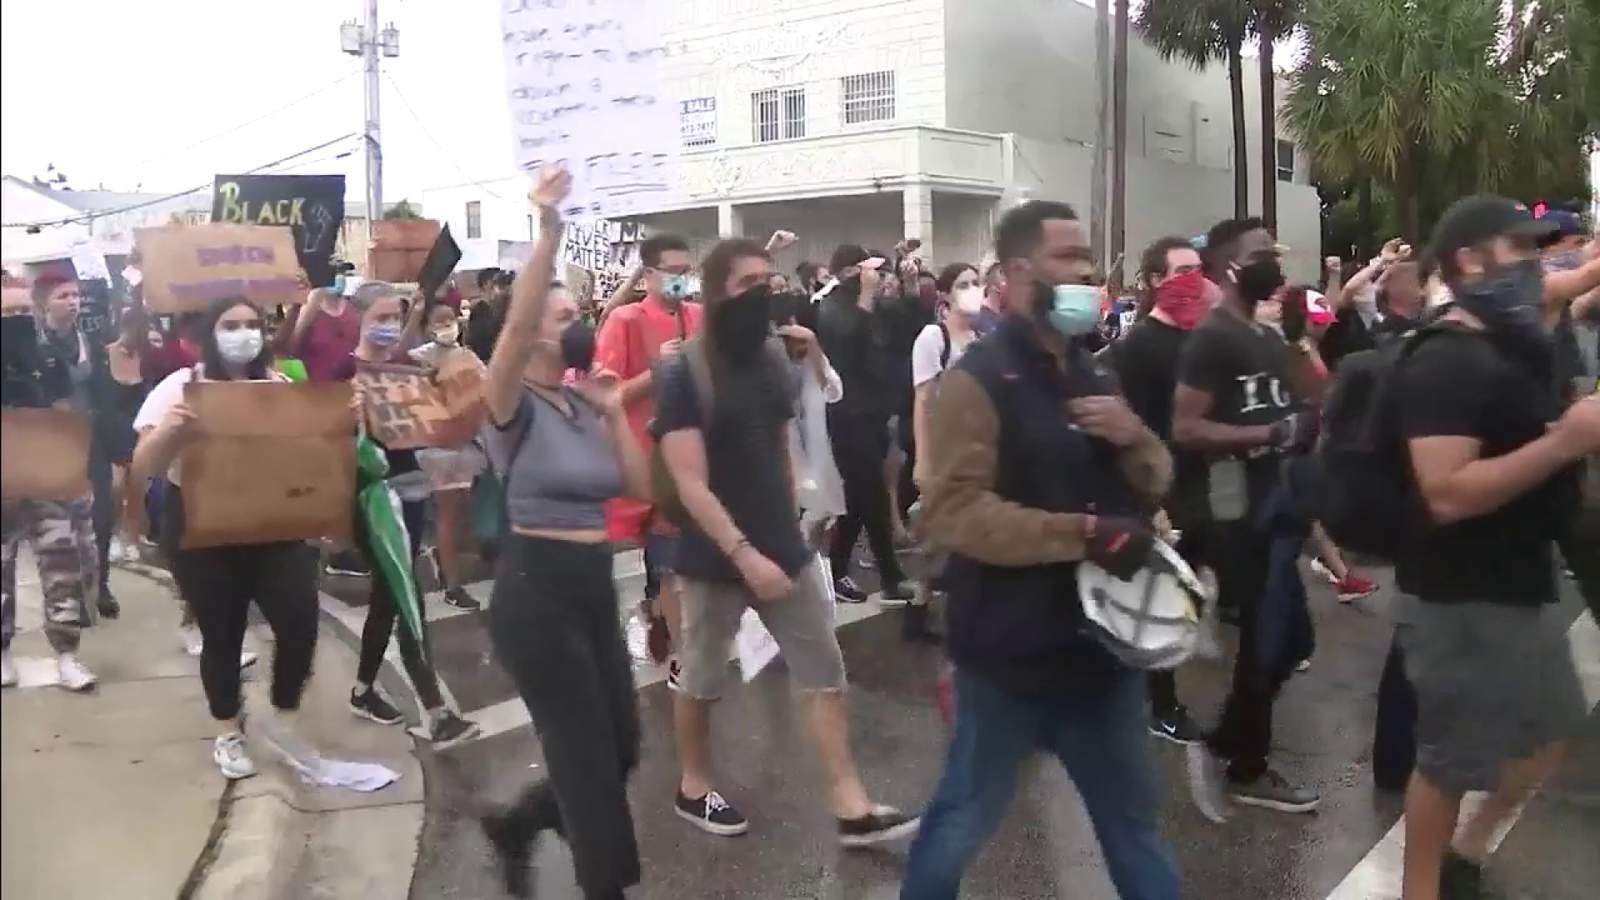 Protests pick up again in Miami; Police want to keep curfew in place through the weekend